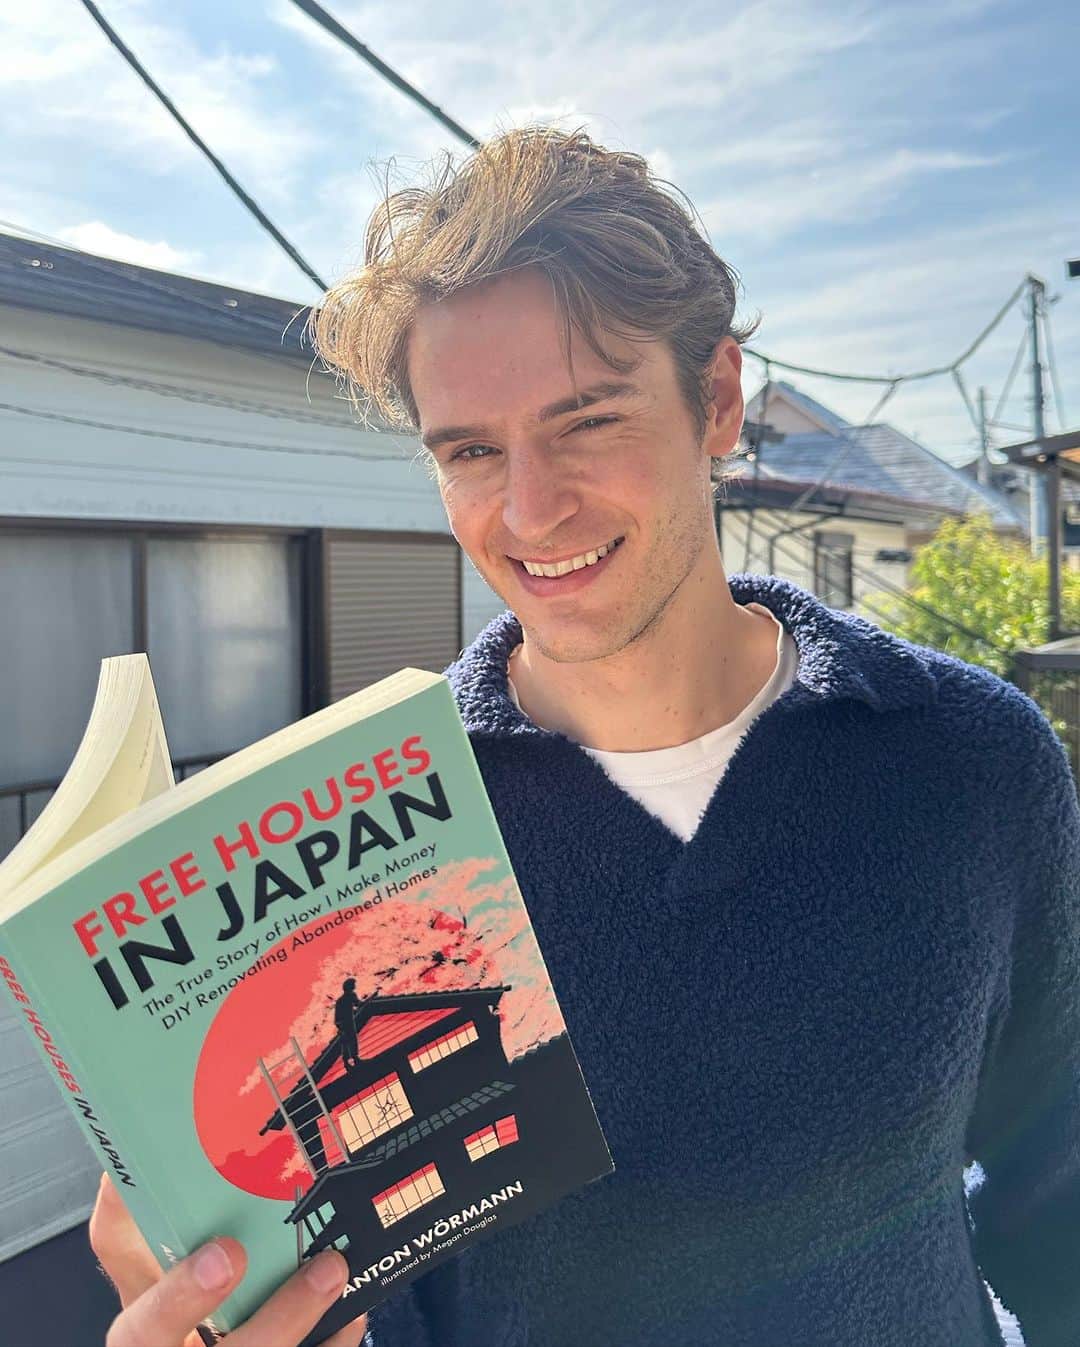 Anton Wormannのインスタグラム：「Exciting News! 😍 My book, ”Free Houses in Japan: The True Story of How I Make Money DIY Renovating Abandoned Homes,” is officially LIVE on all Amazon platforms! 🎉  This book shares my journey from Sweden to Japan, buying and renovating akiyas in Tokyo. It’s an overview and a firsthand look at the often overlooked market of abandoned houses, Akiyas in Tokyo.  🏘️ Insights into the Japanese Akiya and DIY market 🔨 Interviews with Japanese akiya investors 🏨 Renovation hacks 🇯🇵 The nitty-gritty of Airbnb licensing and the real deal with ”Free houses.”  Japan is projected to have 22 million abandoned houses in 2033, and my area in central Tokyo alone has more than 50,000 Akiyas.  📚✨ With over 300 pages filled with stories, graphs, and illustrations, this book is a culmination of the thousands of comments I’ve received on my YouTube channel ”Anton in Japan,” which I launched earlier this year. ❤️🫡 #Akiya #Japan #Freehousesinjapan #DIY #Tokyo #renovation」